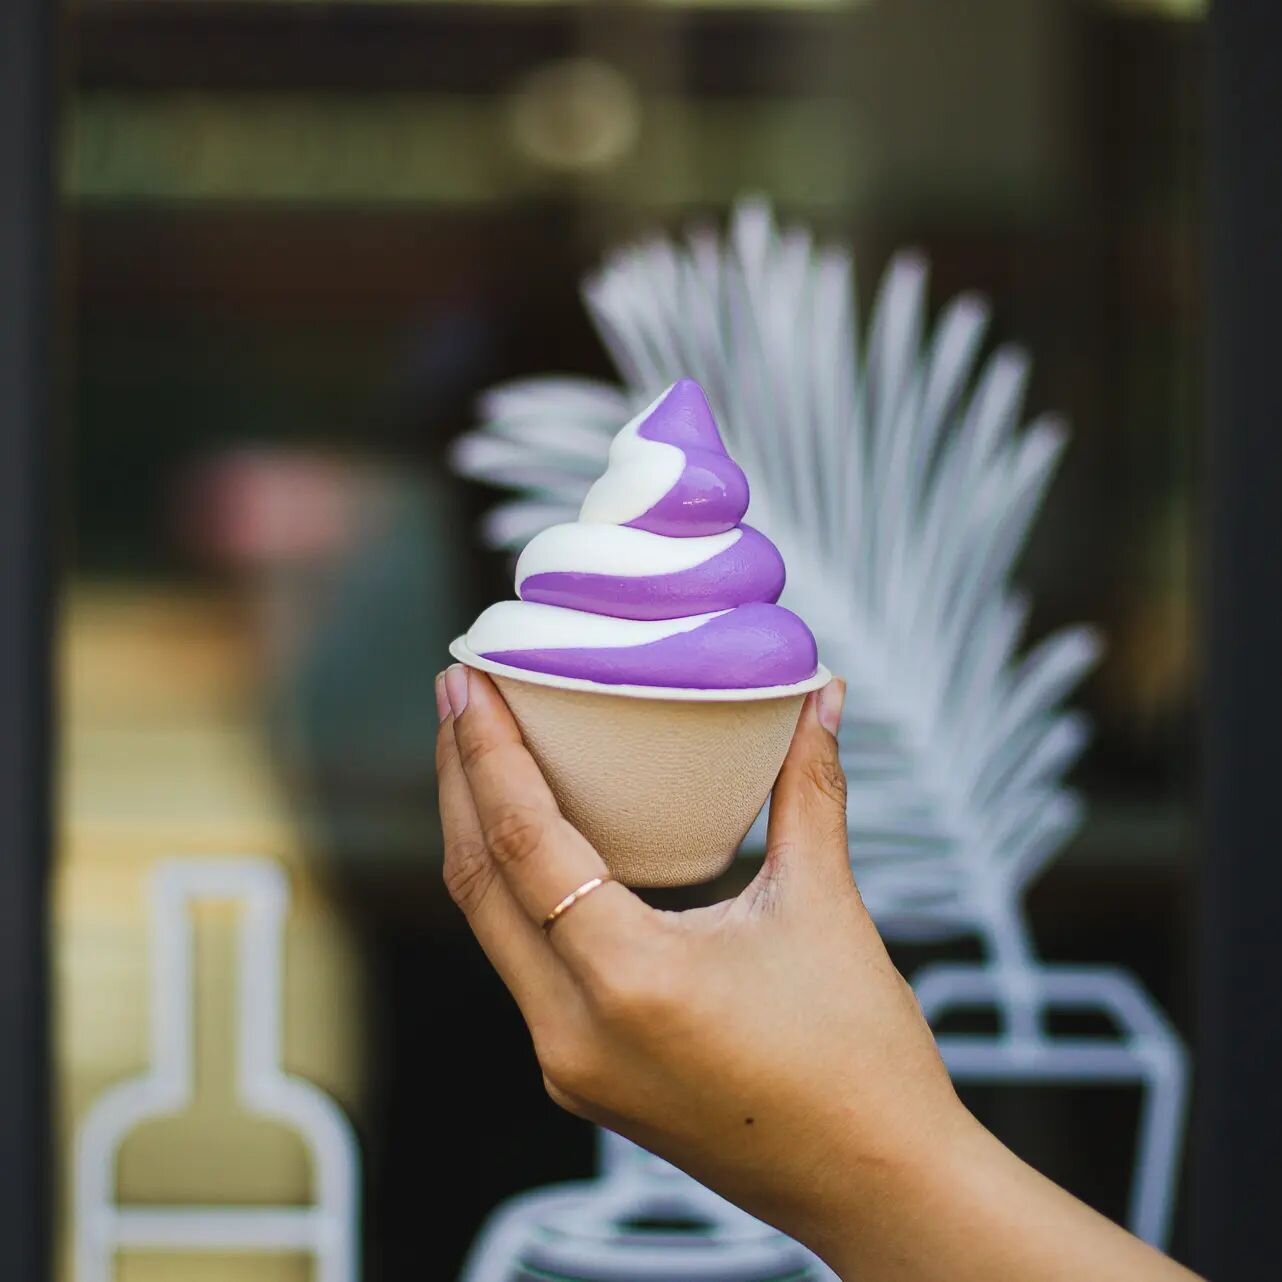 Soft serve machine is ice cold and we're ready to rock a little earlier today! 

Week 2 of our condensed milk and ube soft serve is happening right about now!  Every Fridays and Saturdays from 11:30am - 3:30pm.  Tayo na!

#hoodfamous #hoodfamousbakes